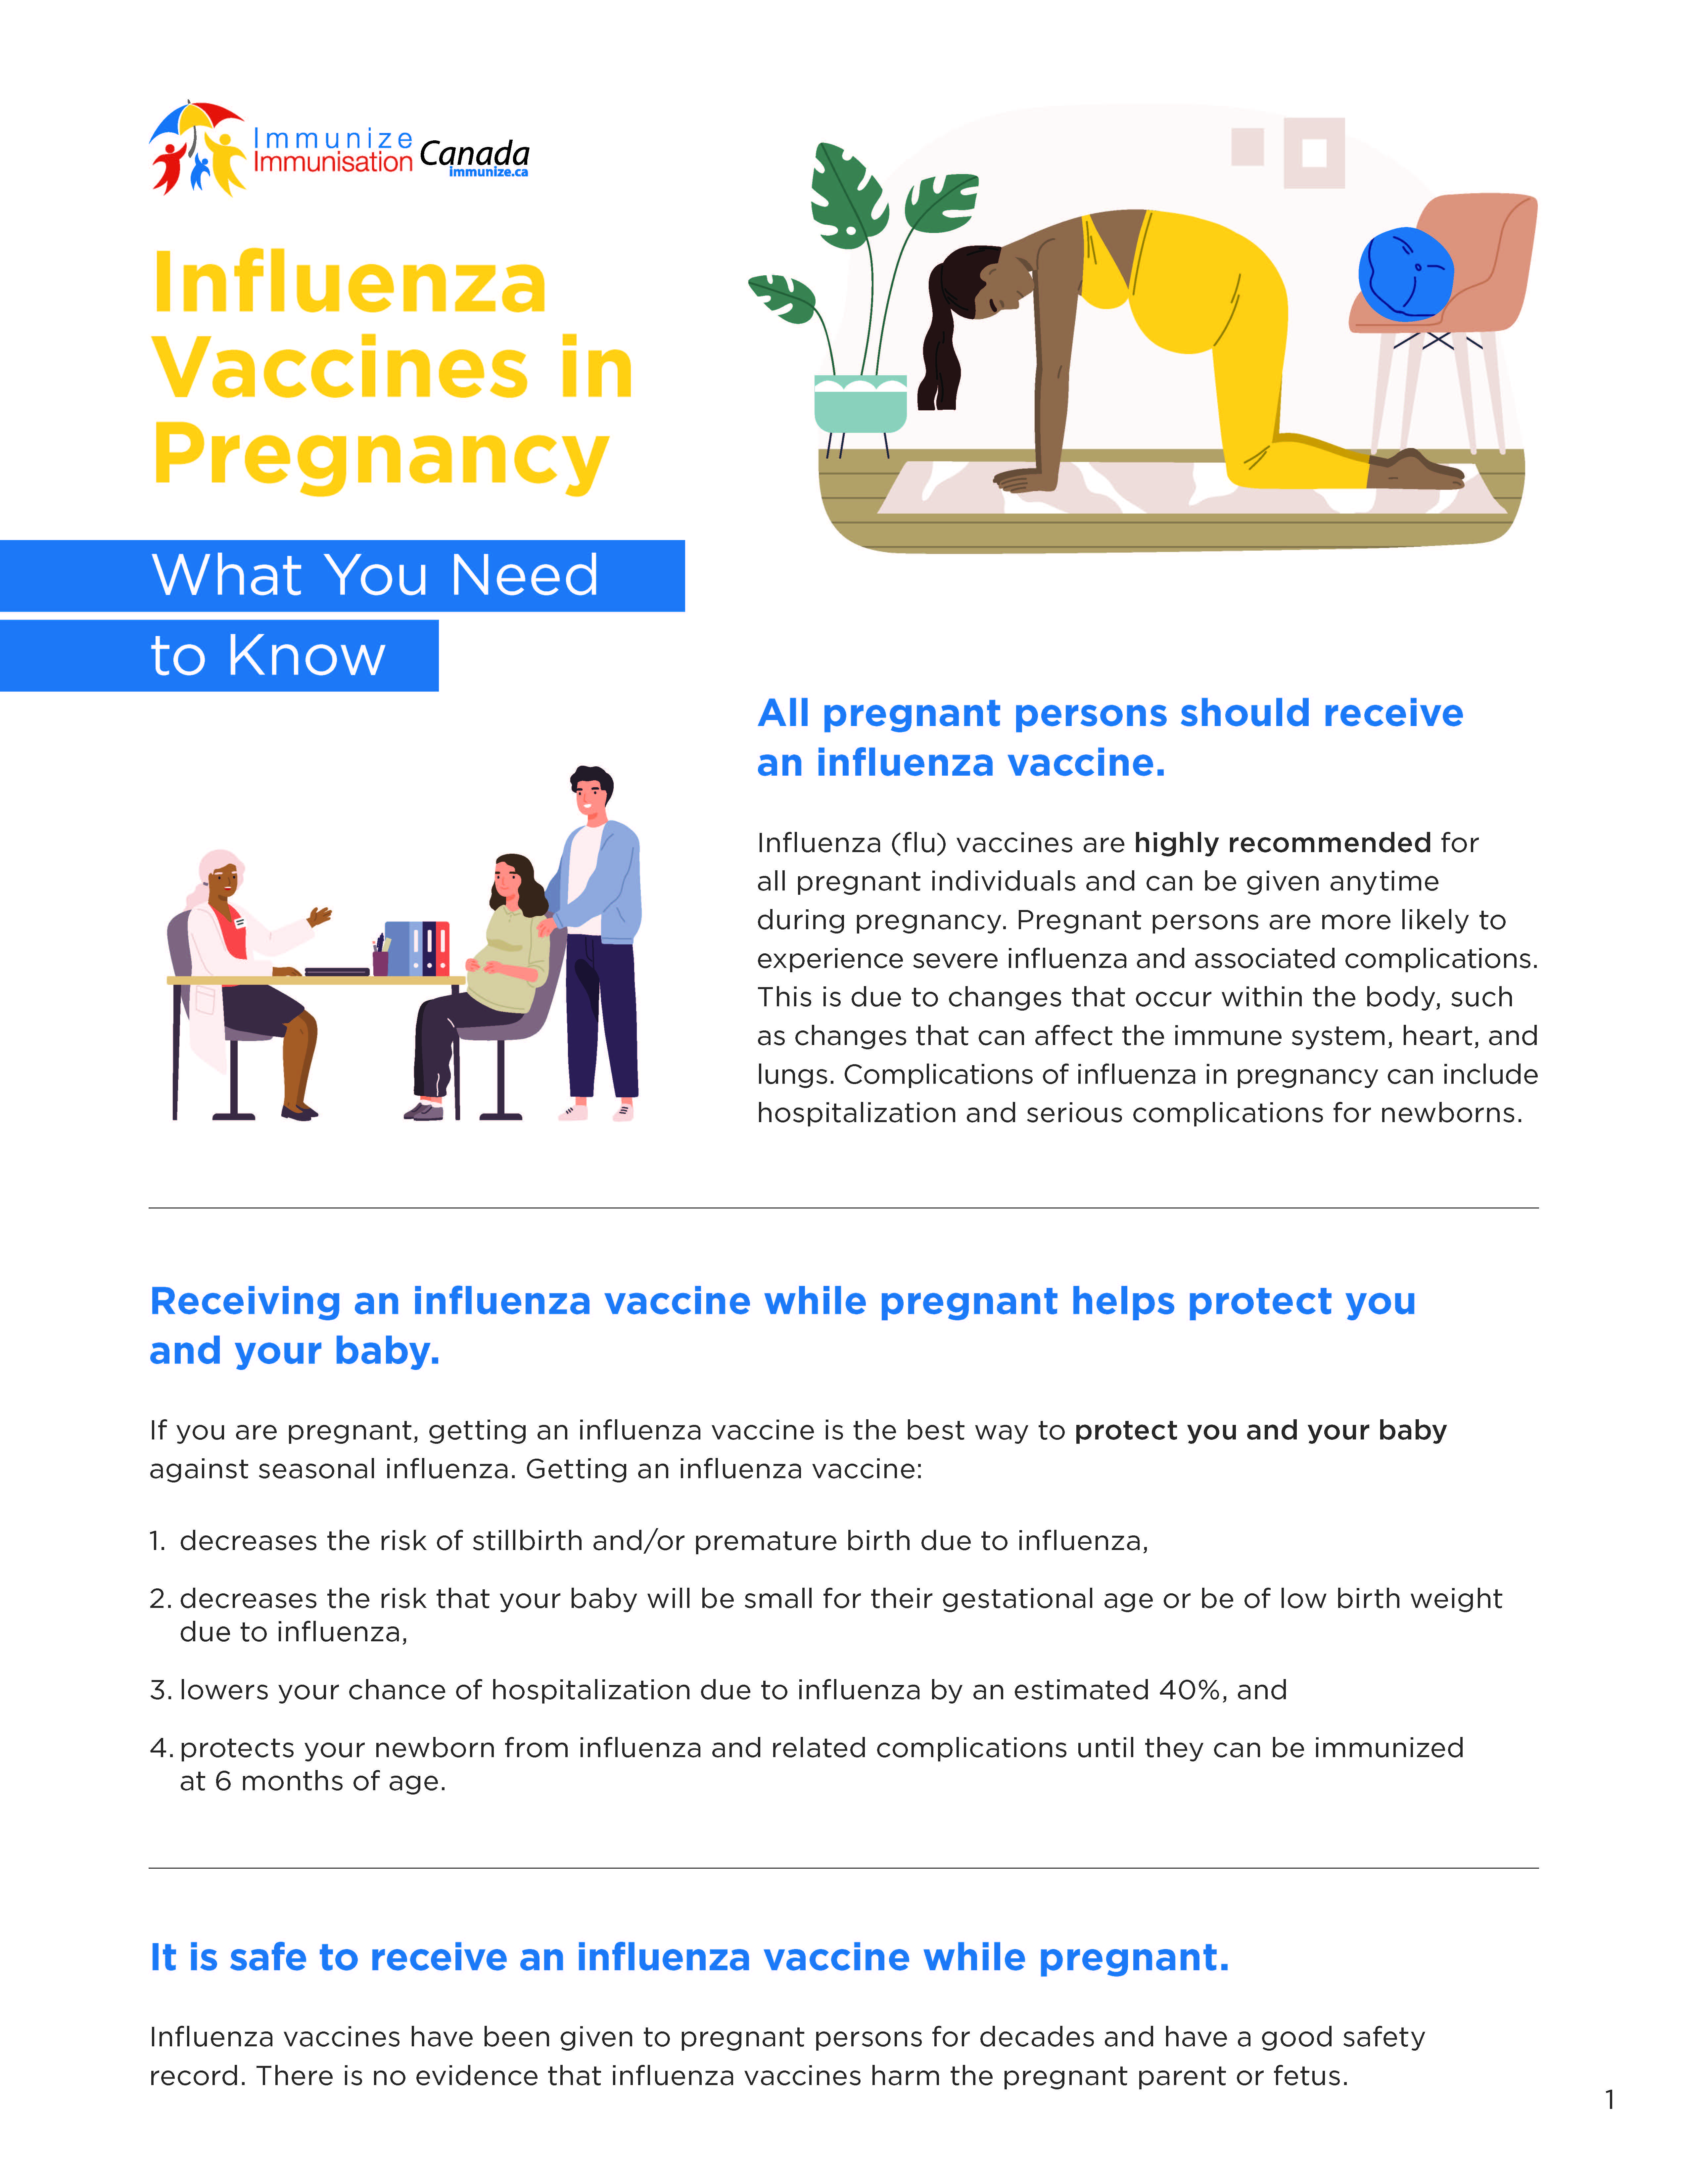 Influenza Vaccines in Pregnancy: What You Need to Know